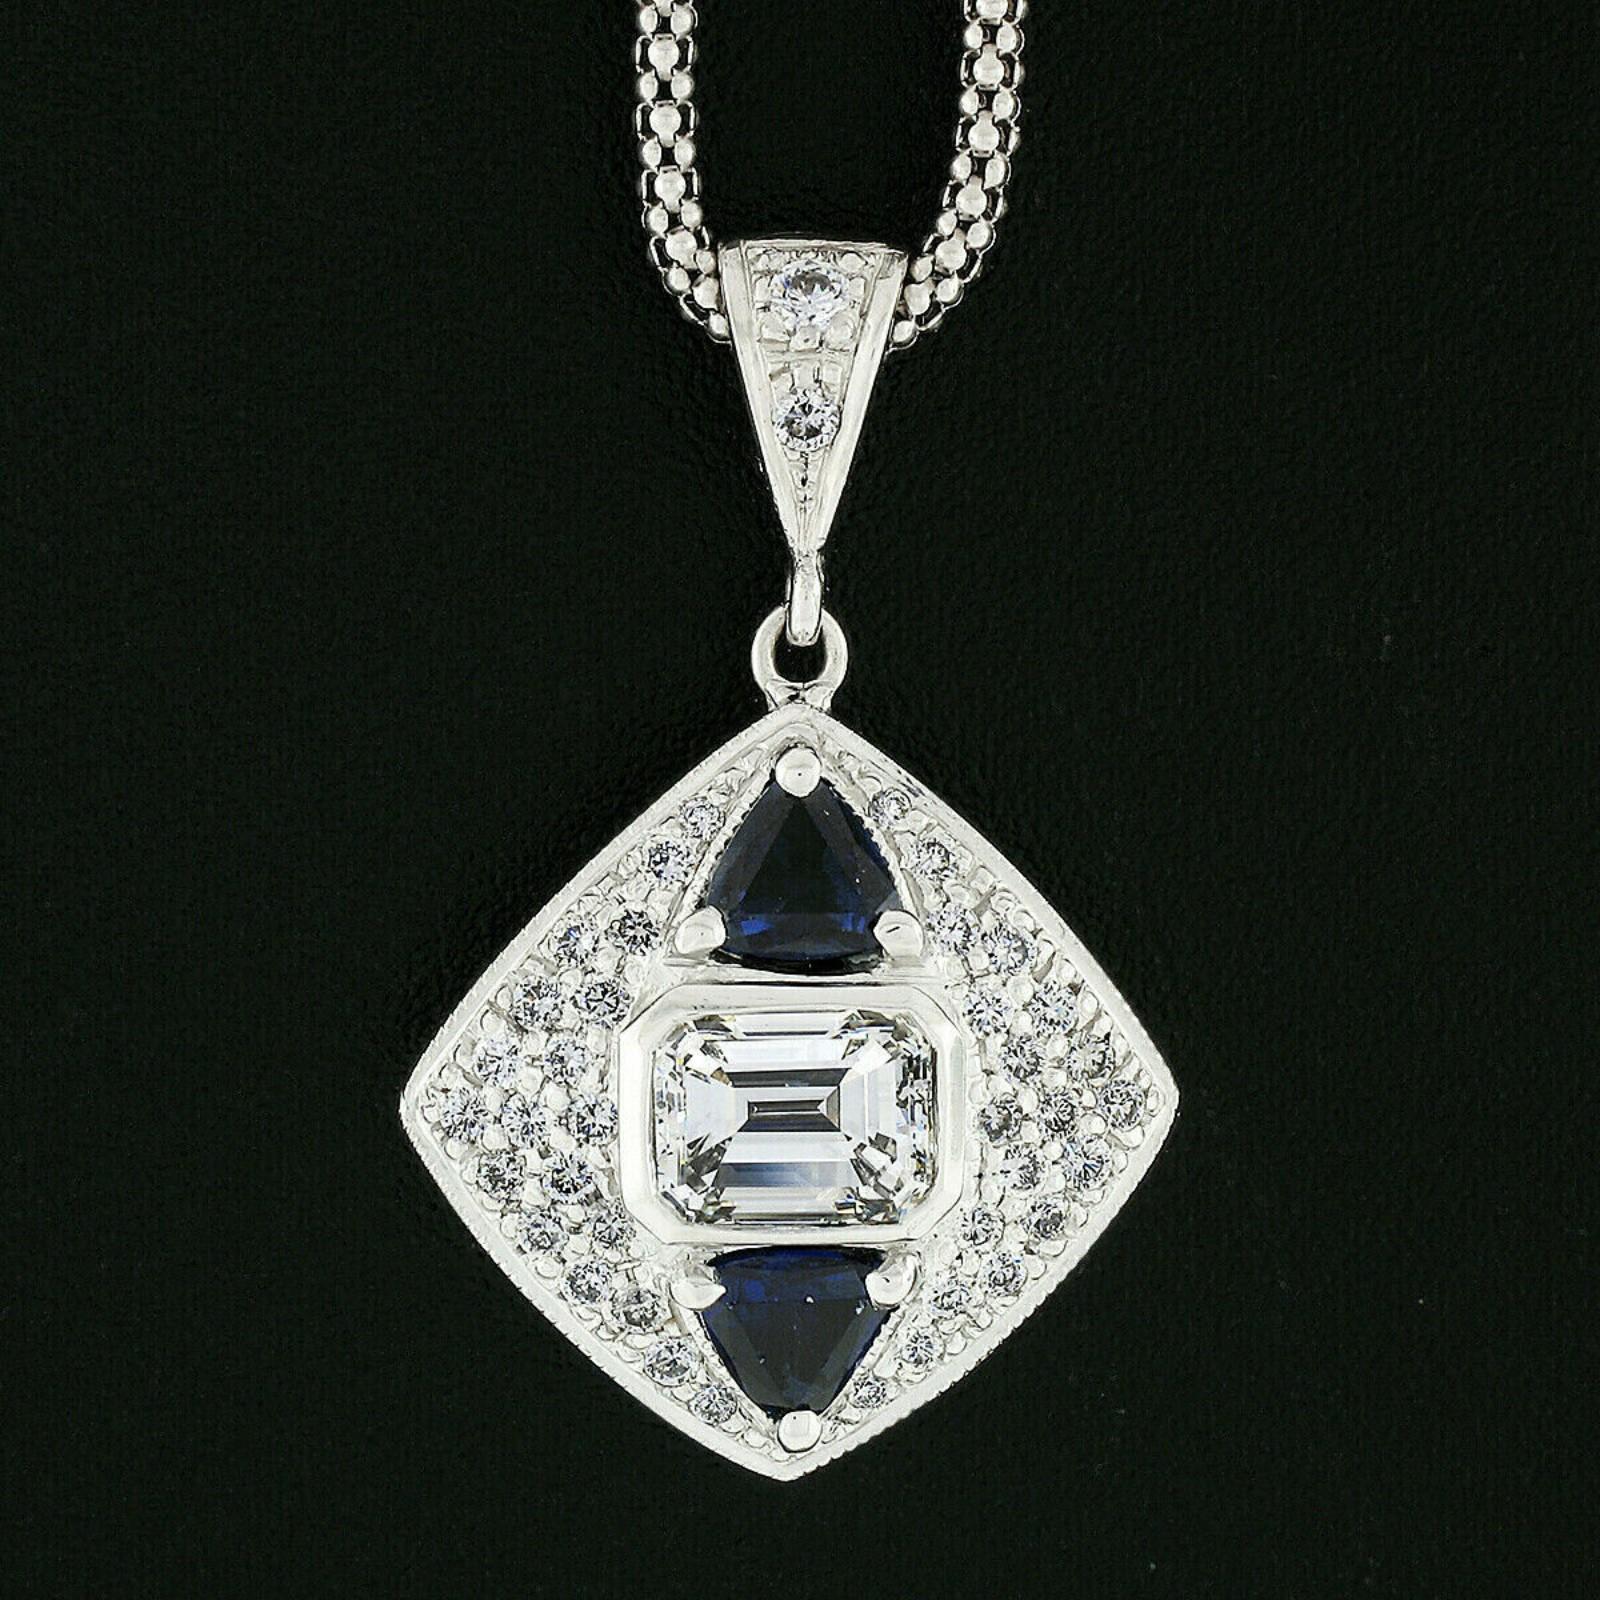 Here we have a magnificent diamond and sapphire pendant that was crafted from solid 14k white gold. It features a gorgeous GIA certified emerald cut diamond weighing exactly 1.02 carats. The diamond is very fine quality with near-colorless I color